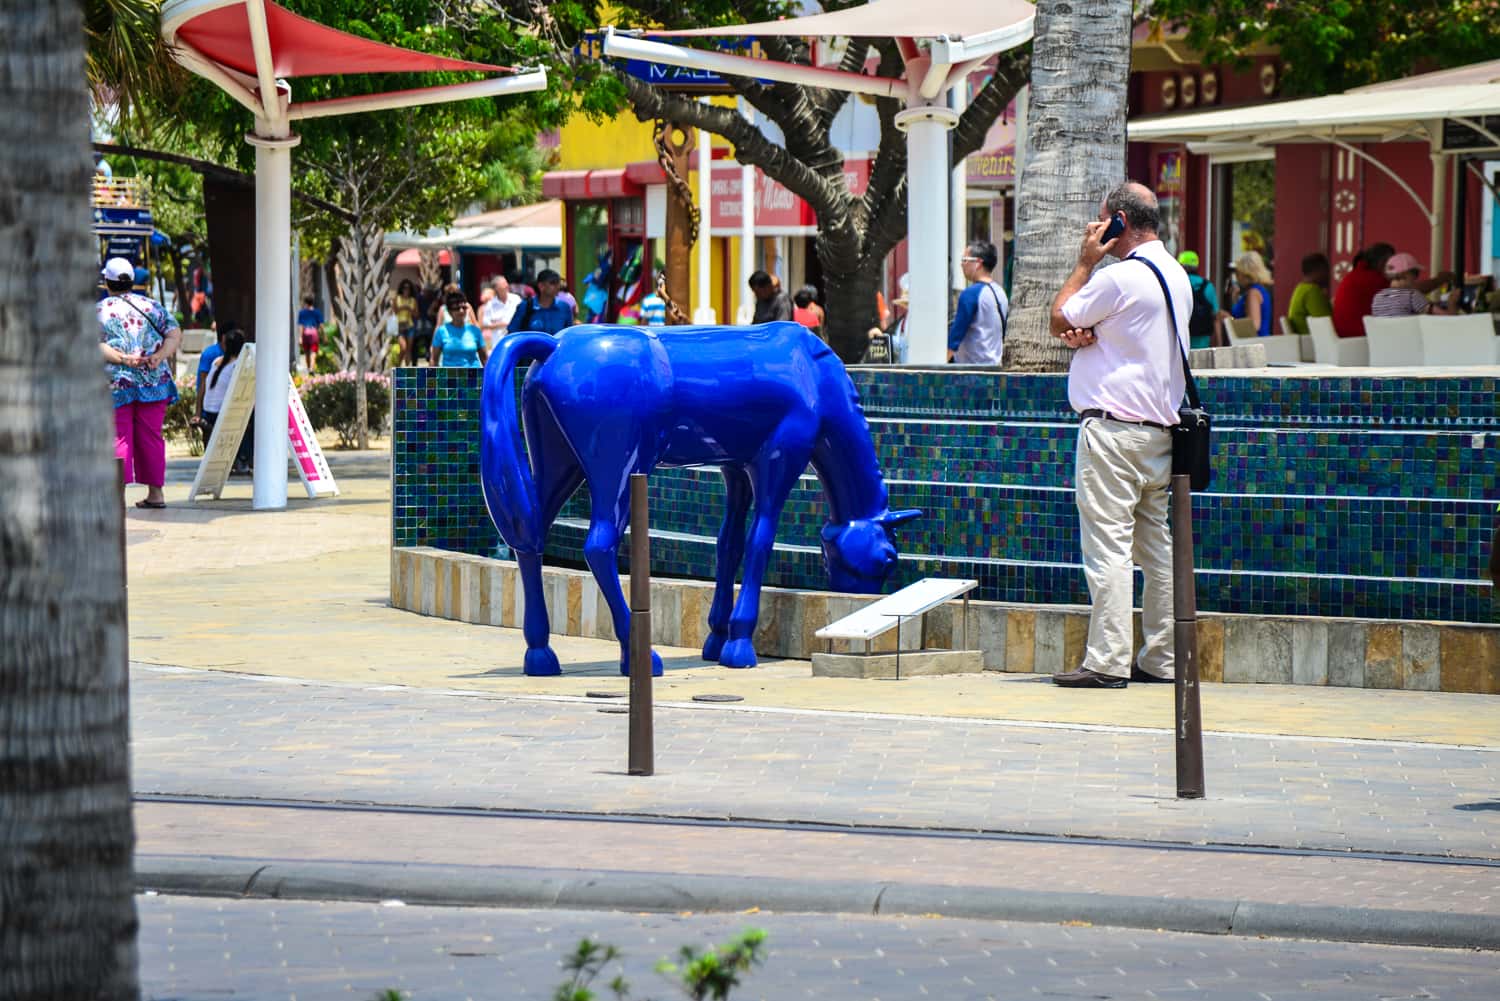 They do seem to have a blue horse thing going here ...